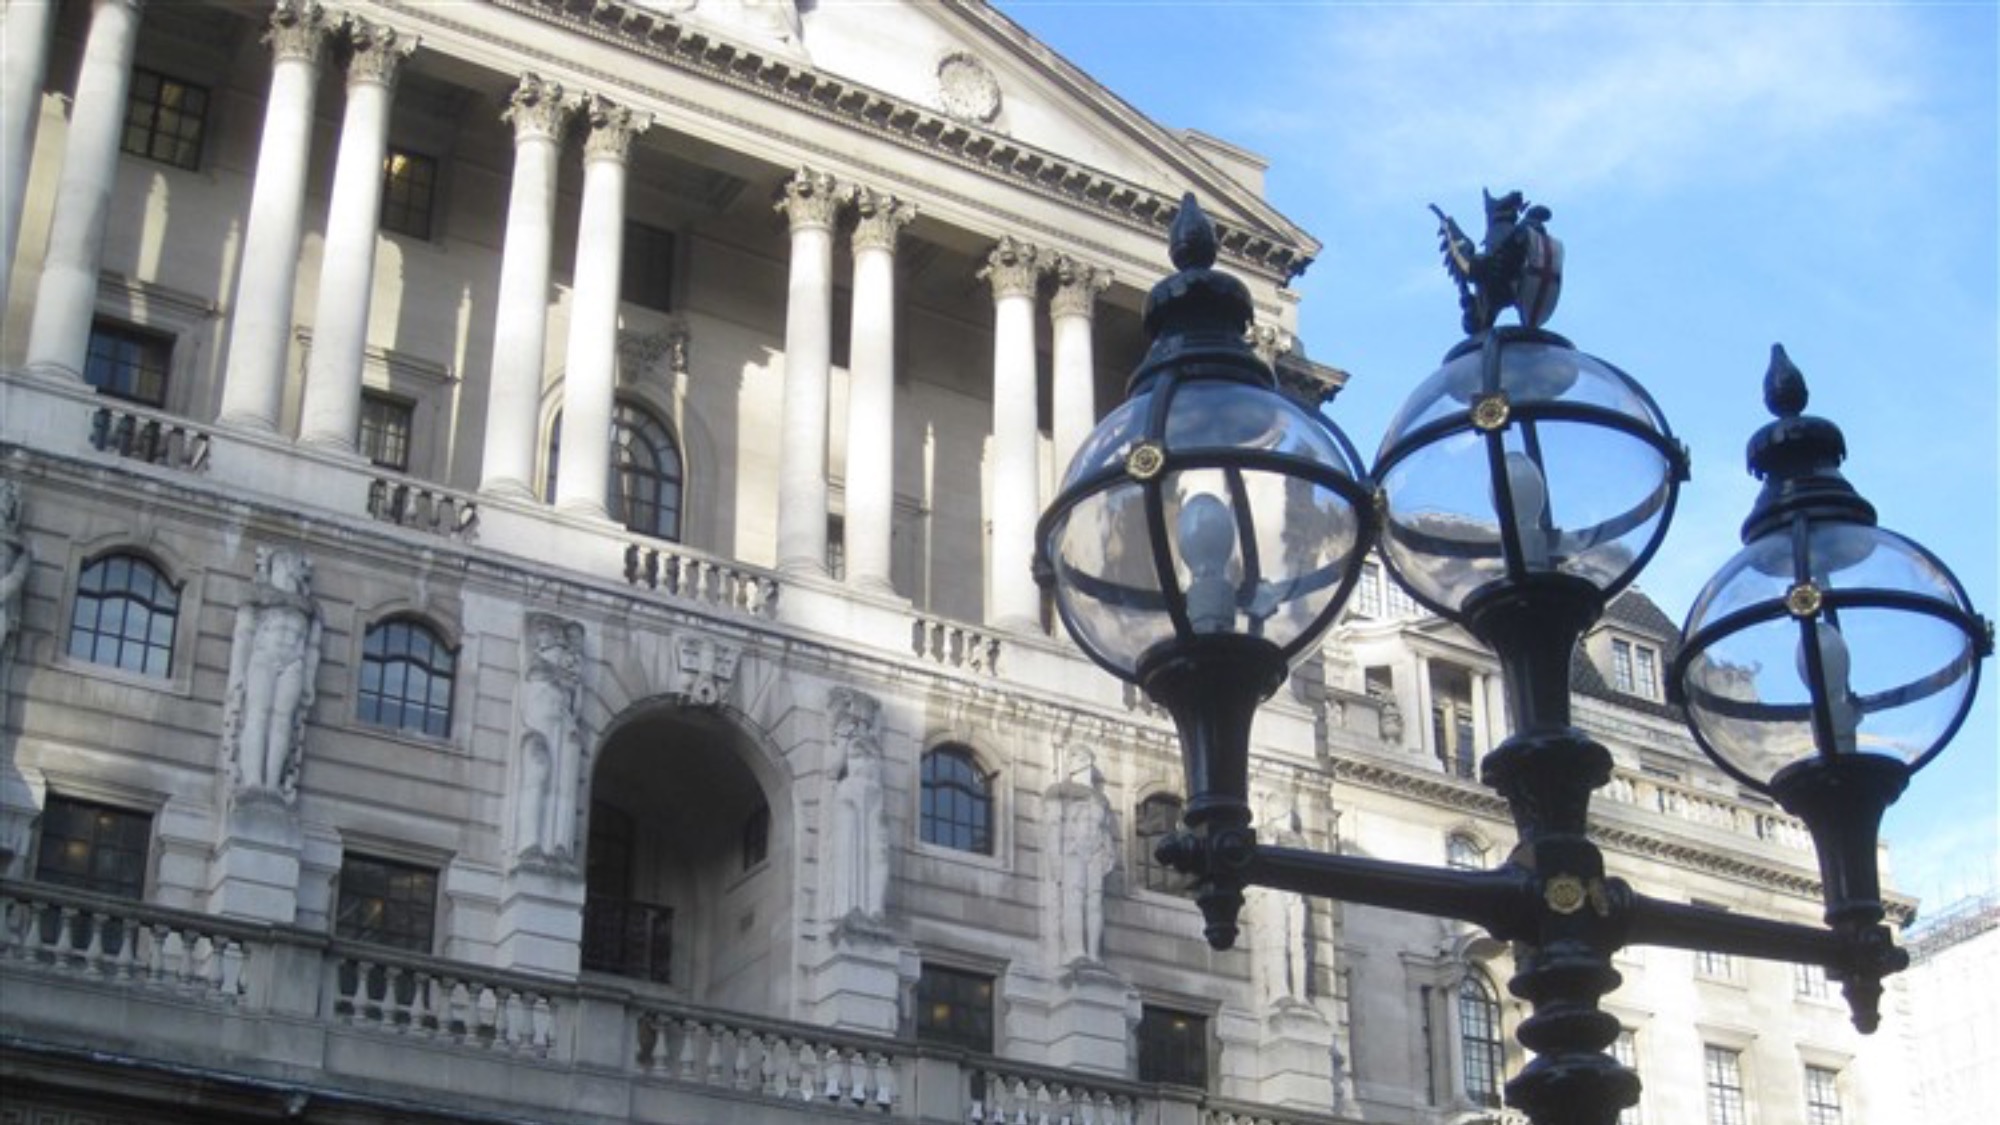 **Interest rates and inflation - the Bank of England should review its approach.